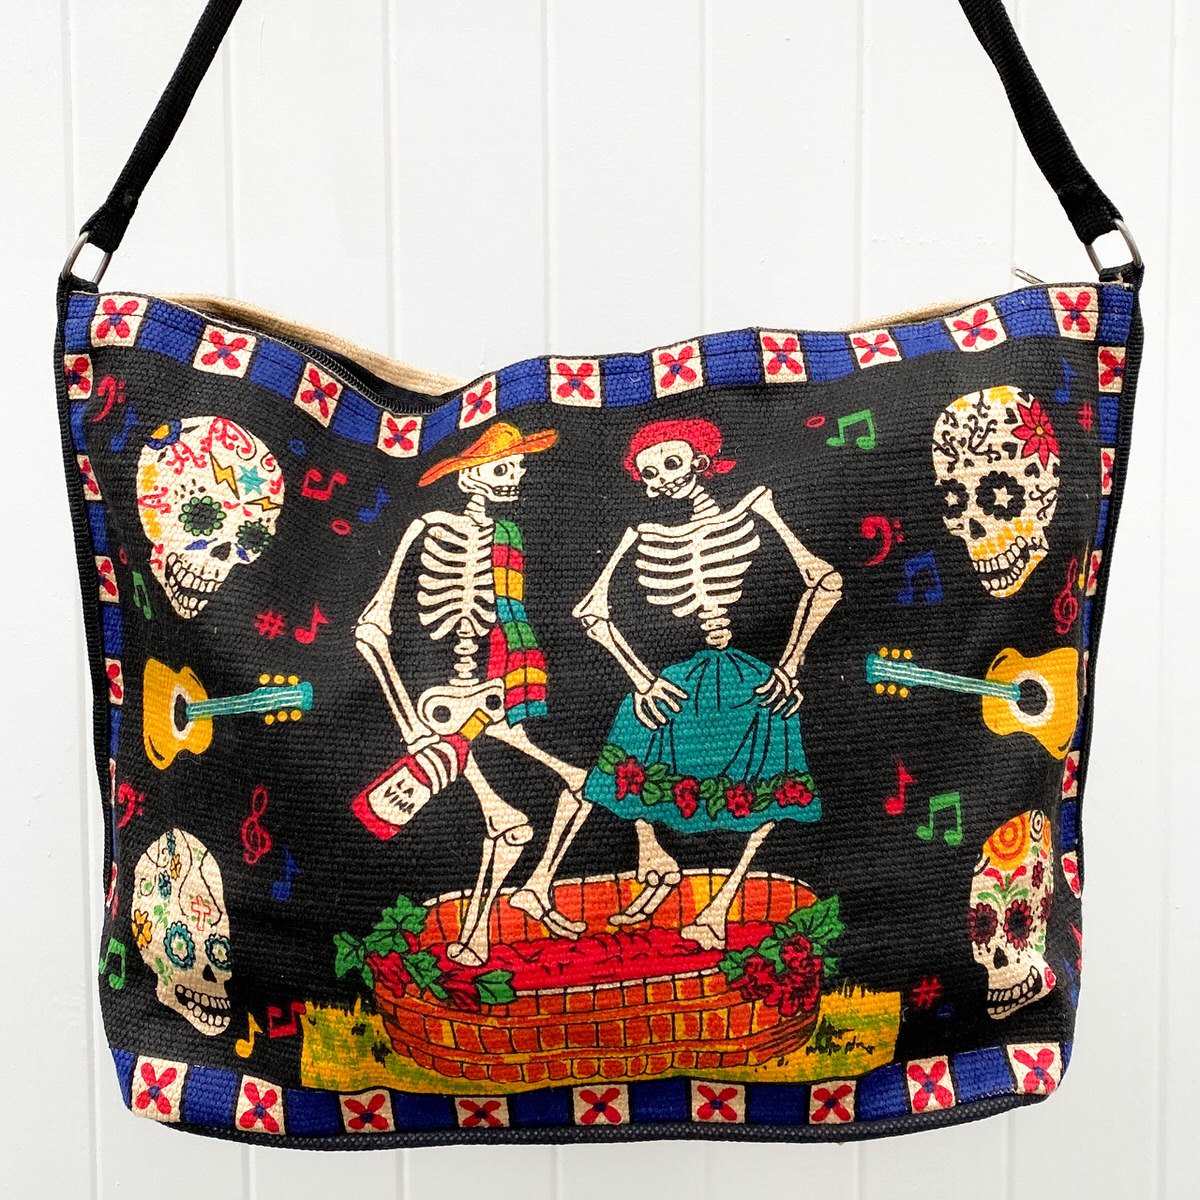 Day of the Dead Dancing Skeleton design in black, blue, red, and yellow, silkscreened on cotton handbag with black cotton strap, shown against white background.